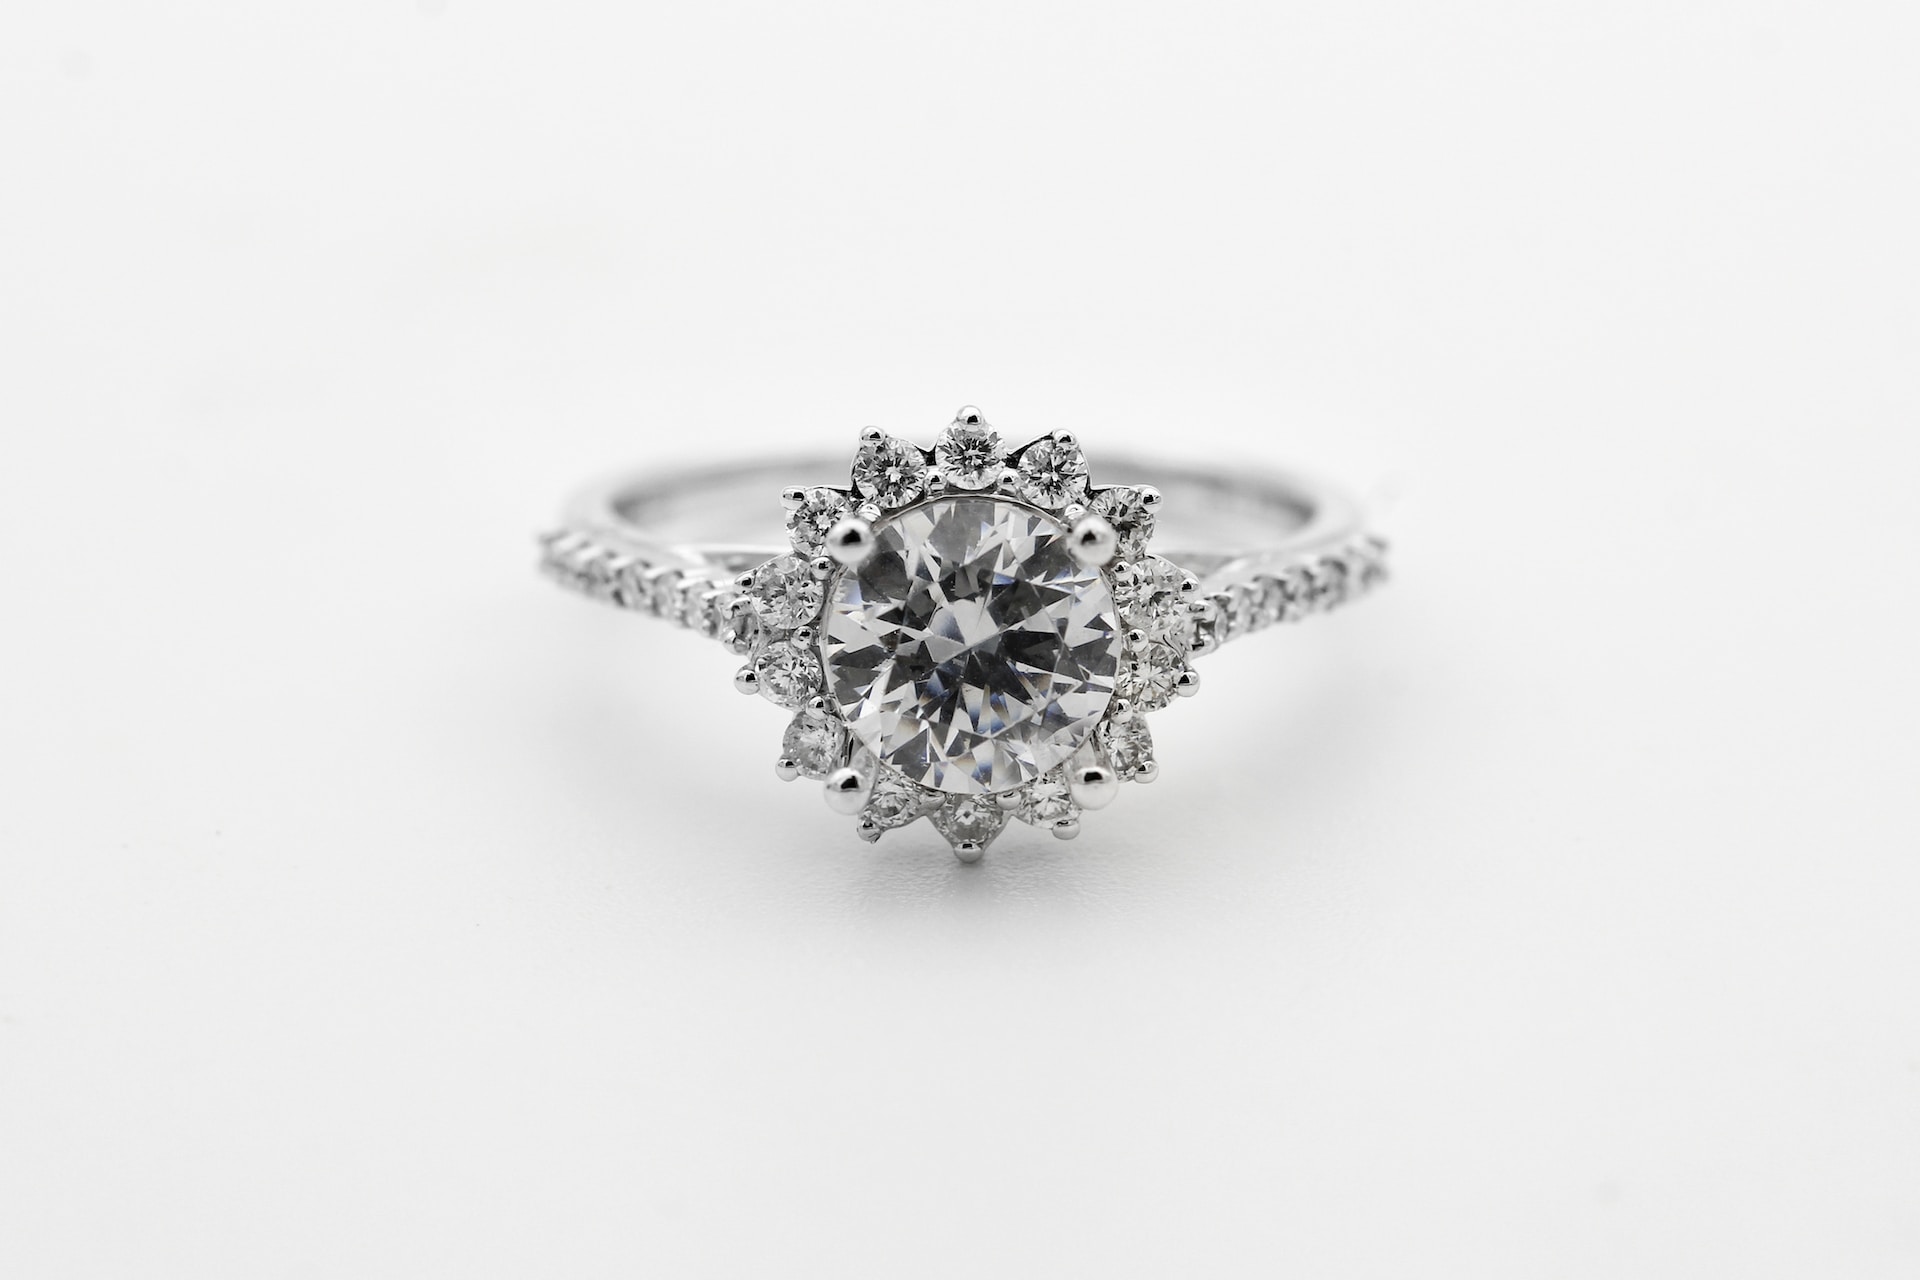 a platinum engagement ring with a floral inspired halo with side stones against a white background